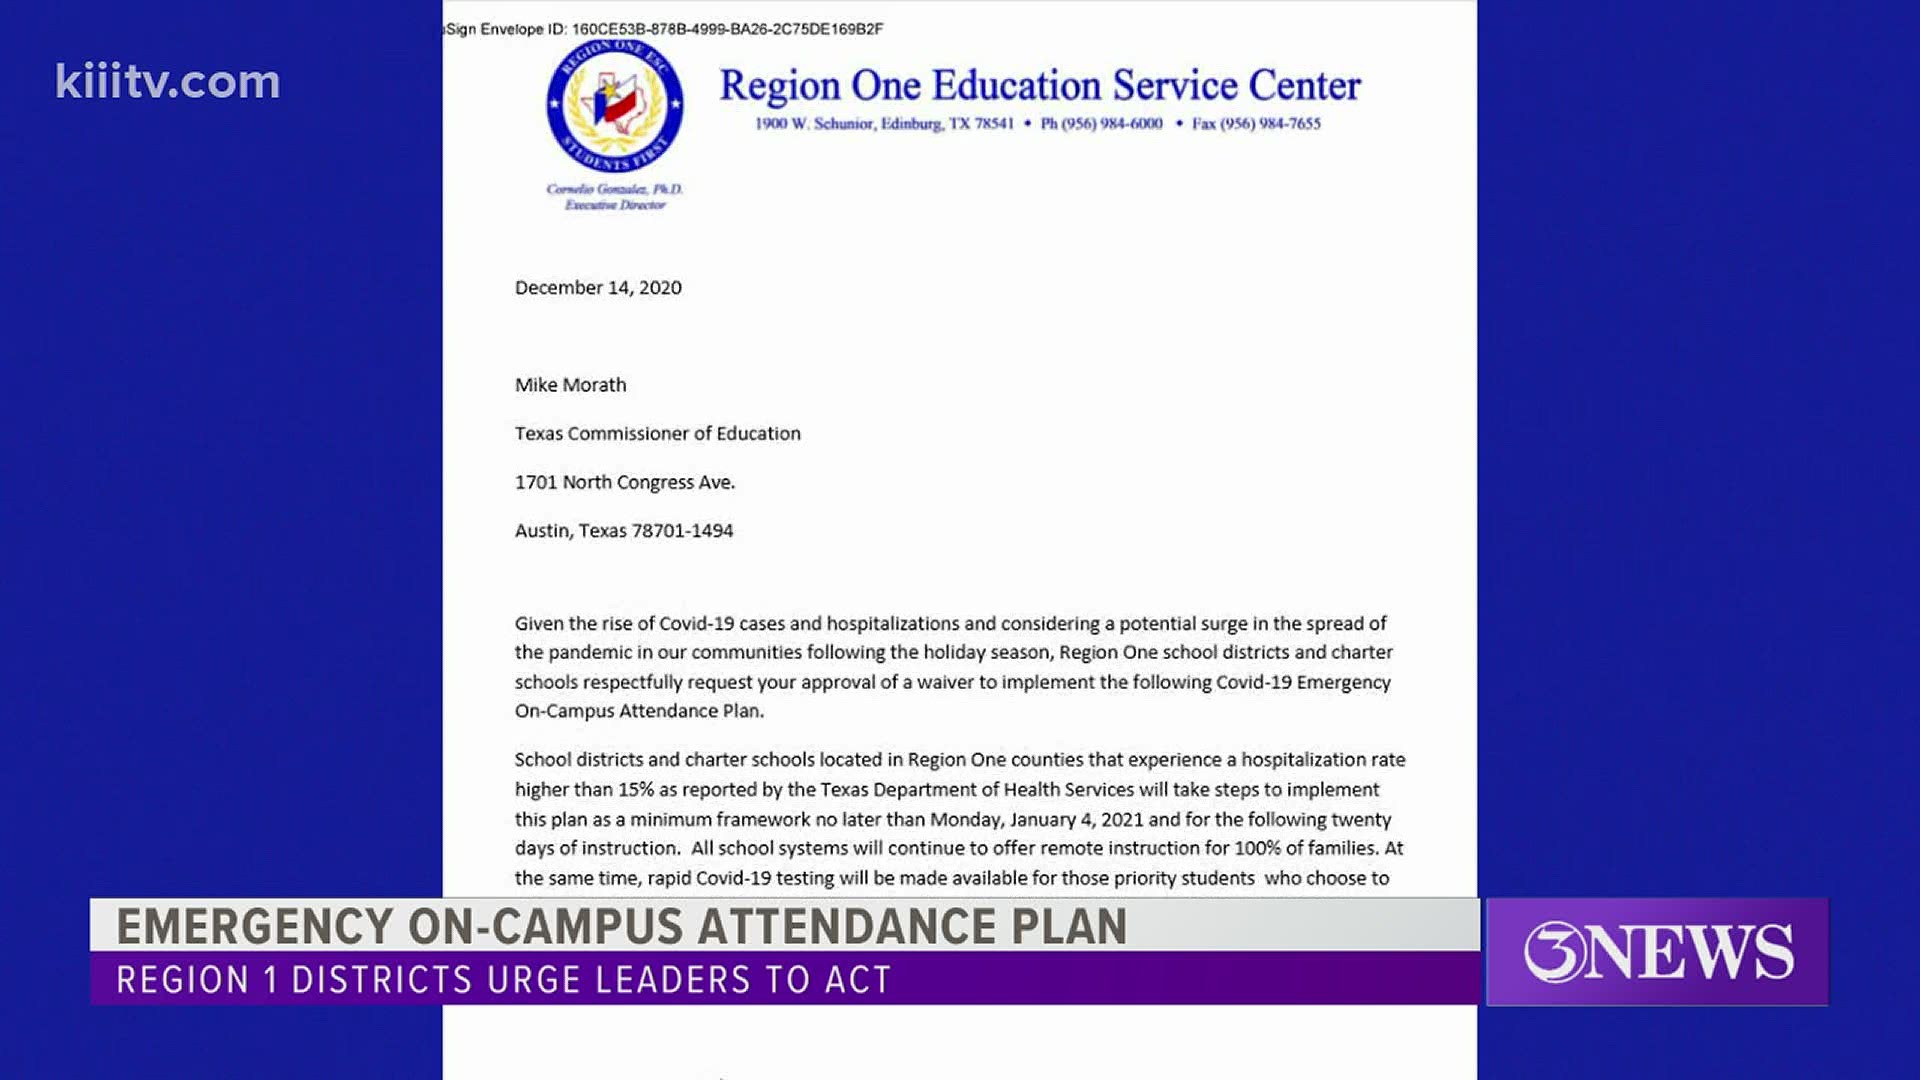 The waiver would allow region one school districts  to offer remote instruction for all families in addition to offering rapid COVID-19 testing for students.